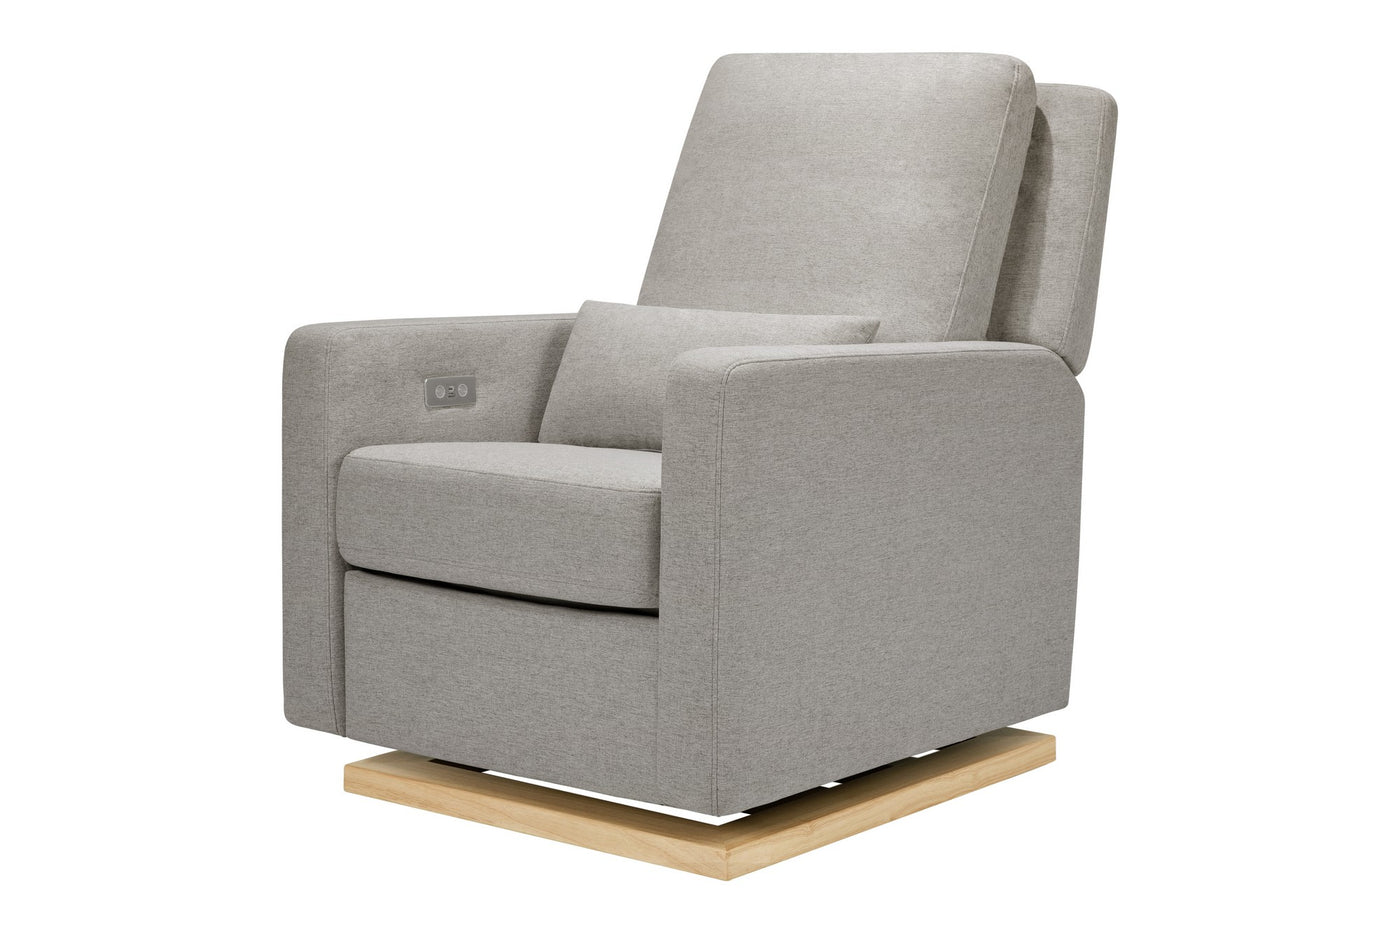 Sigi Electronic Recliner and Glider in Eco-Performance Fabric with USB port | Water Repellent & Stain Resistant